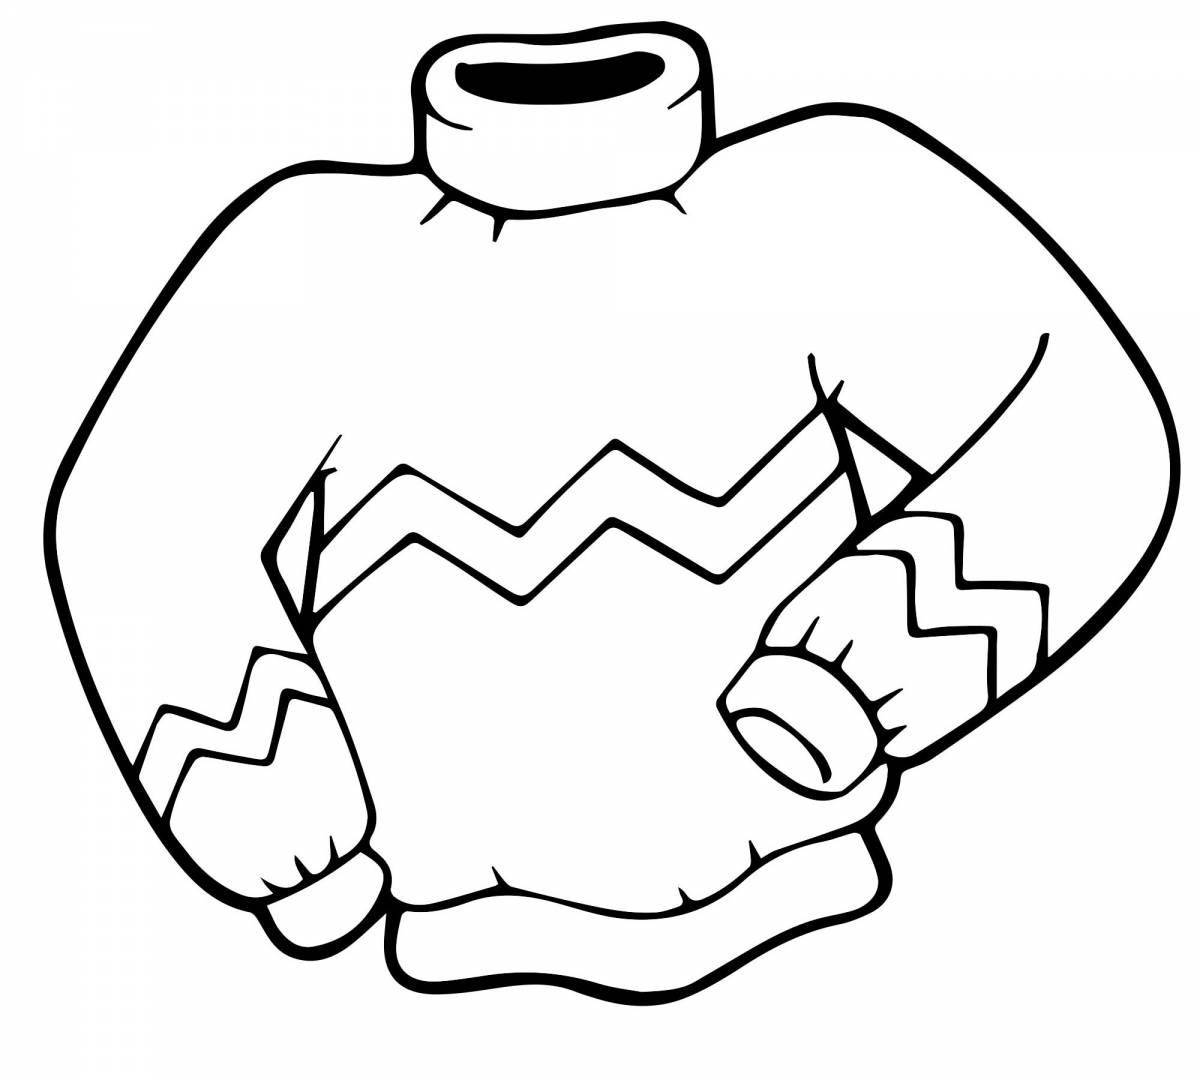 Exotic jumper coloring page